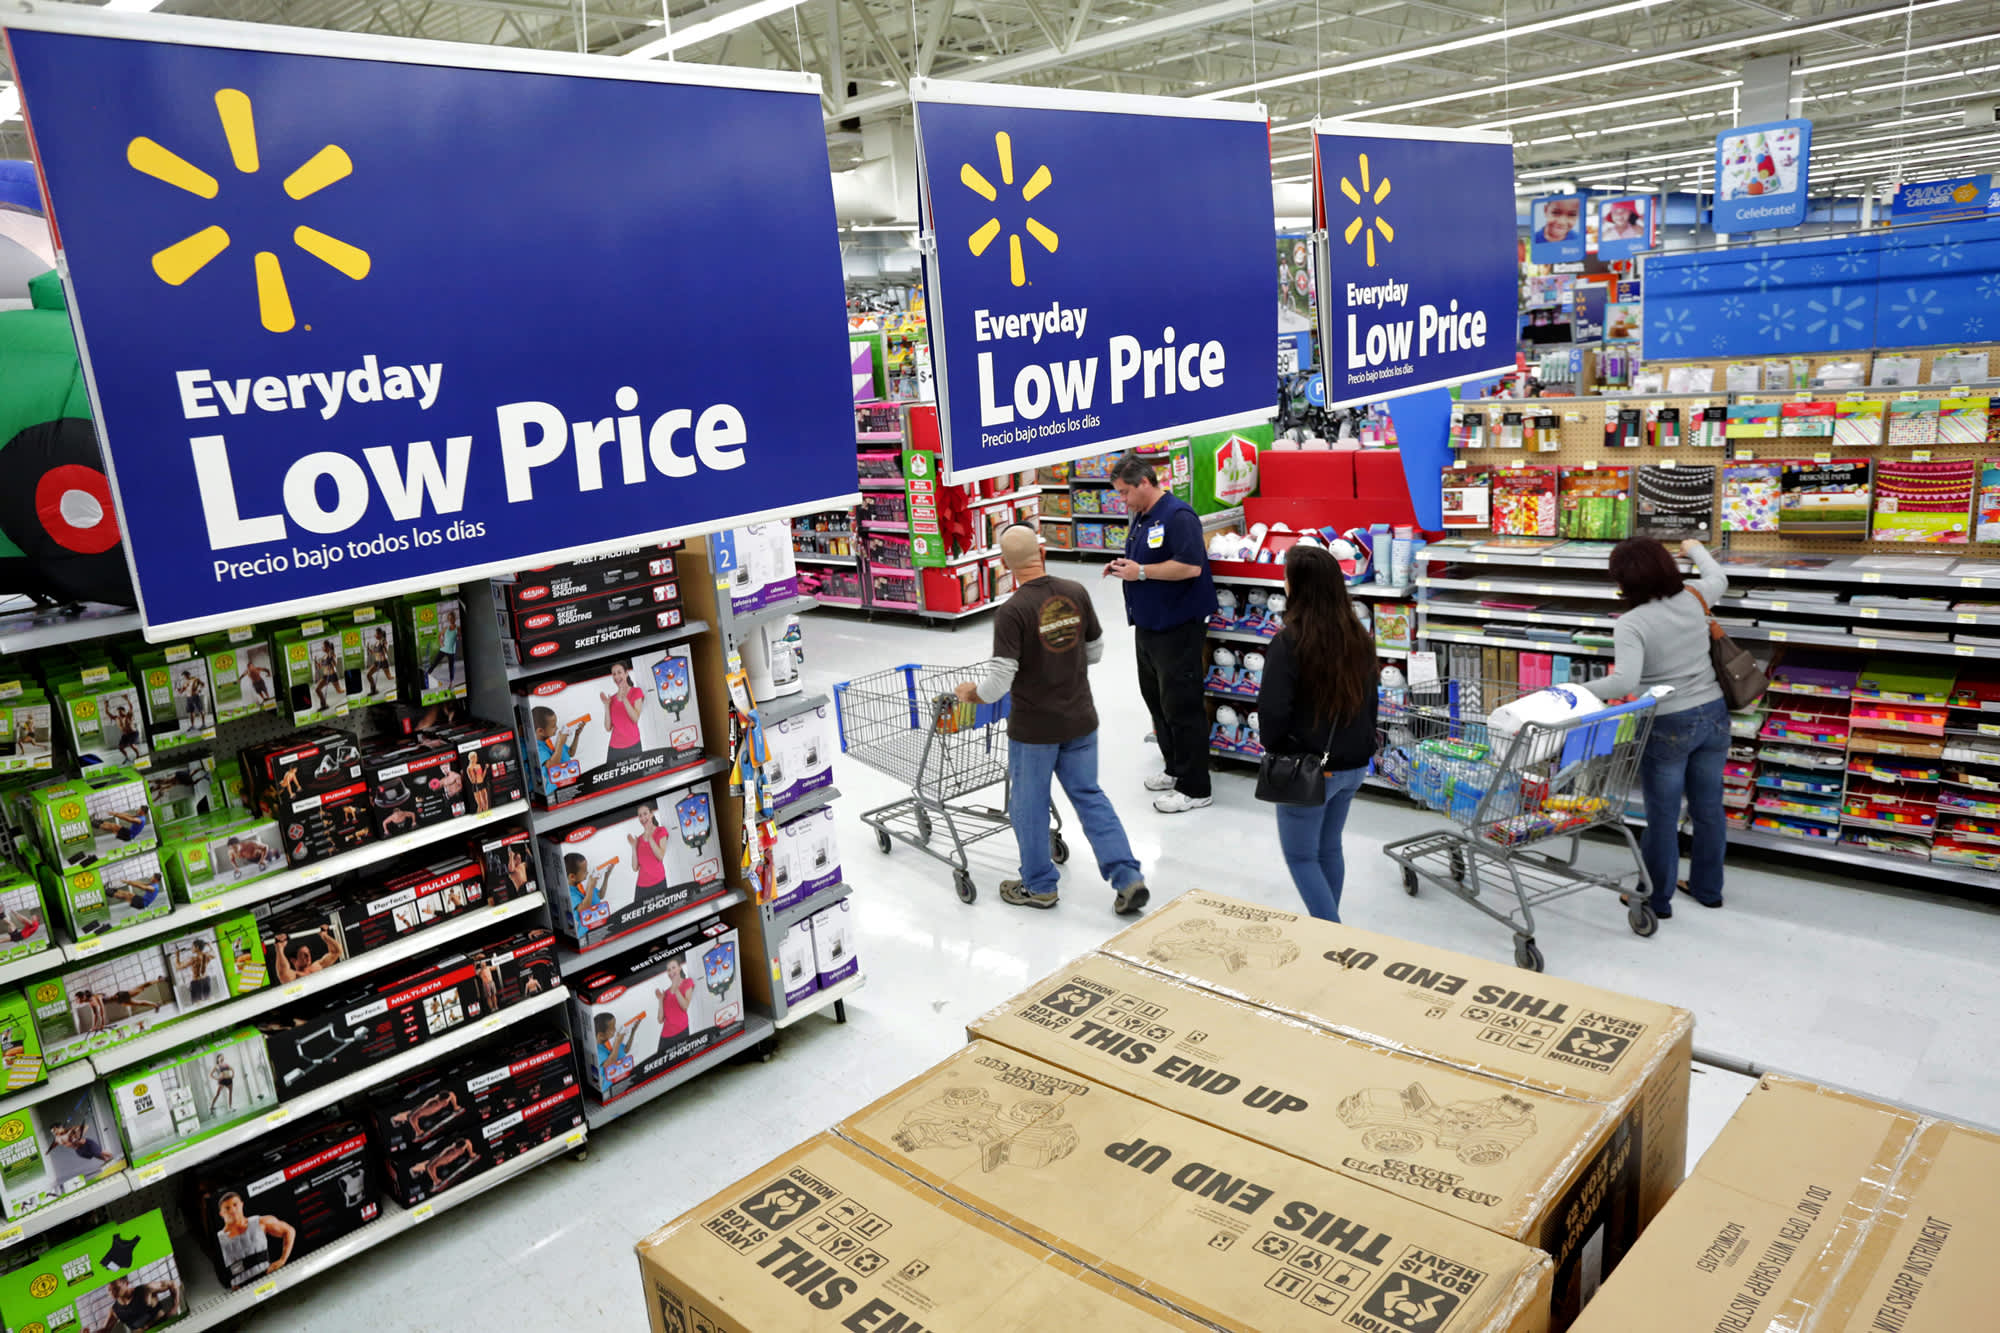 WalMart launches new front in US price war, targets Aldi in grocery aisle